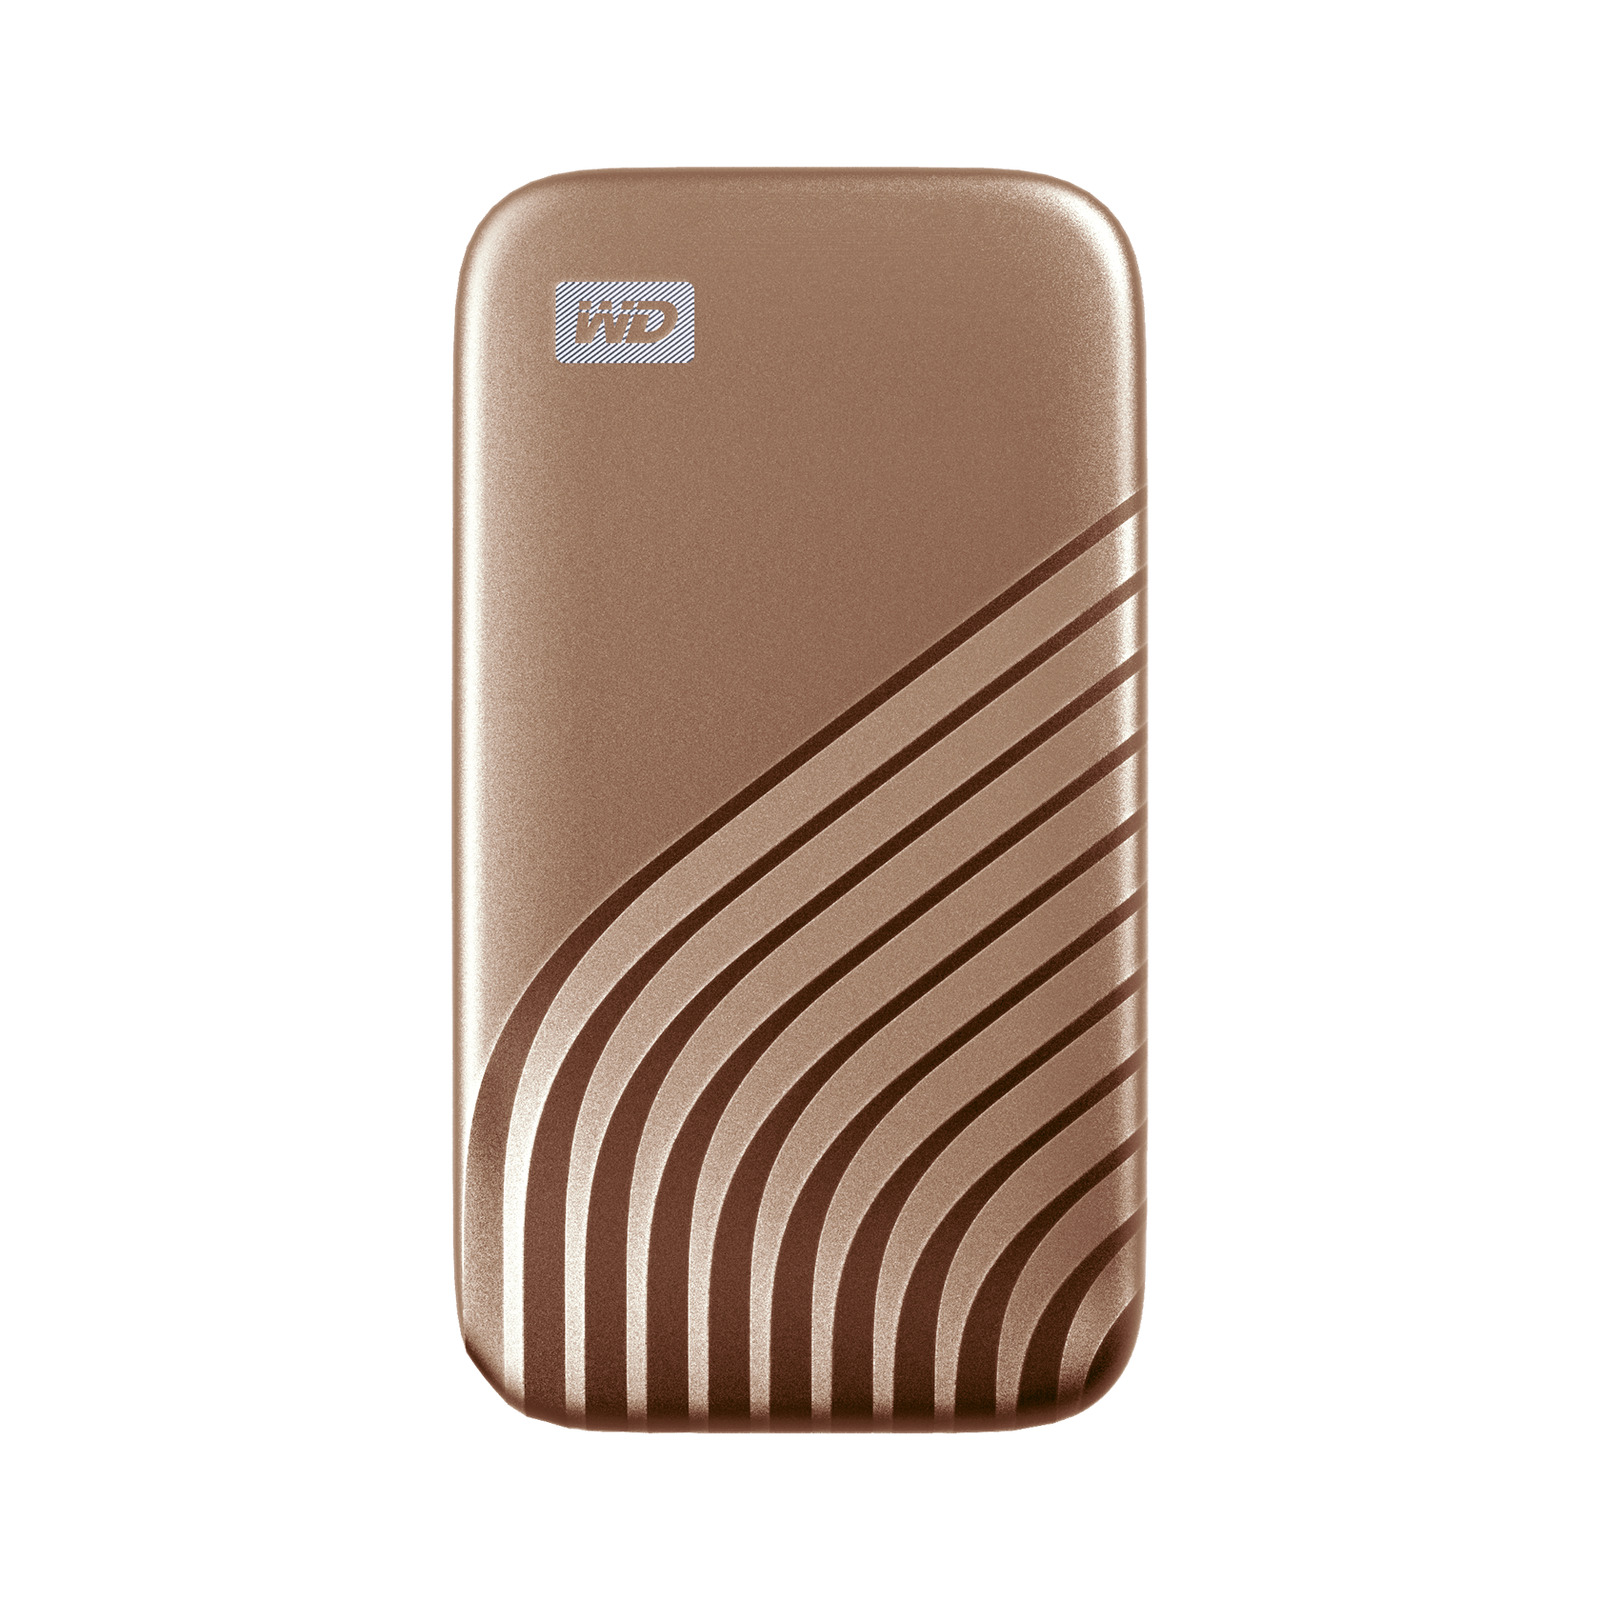 WD 500GB My Passport SSD, Portable Solid State Drive, Gold - WDBAGF5000AGD-WESN